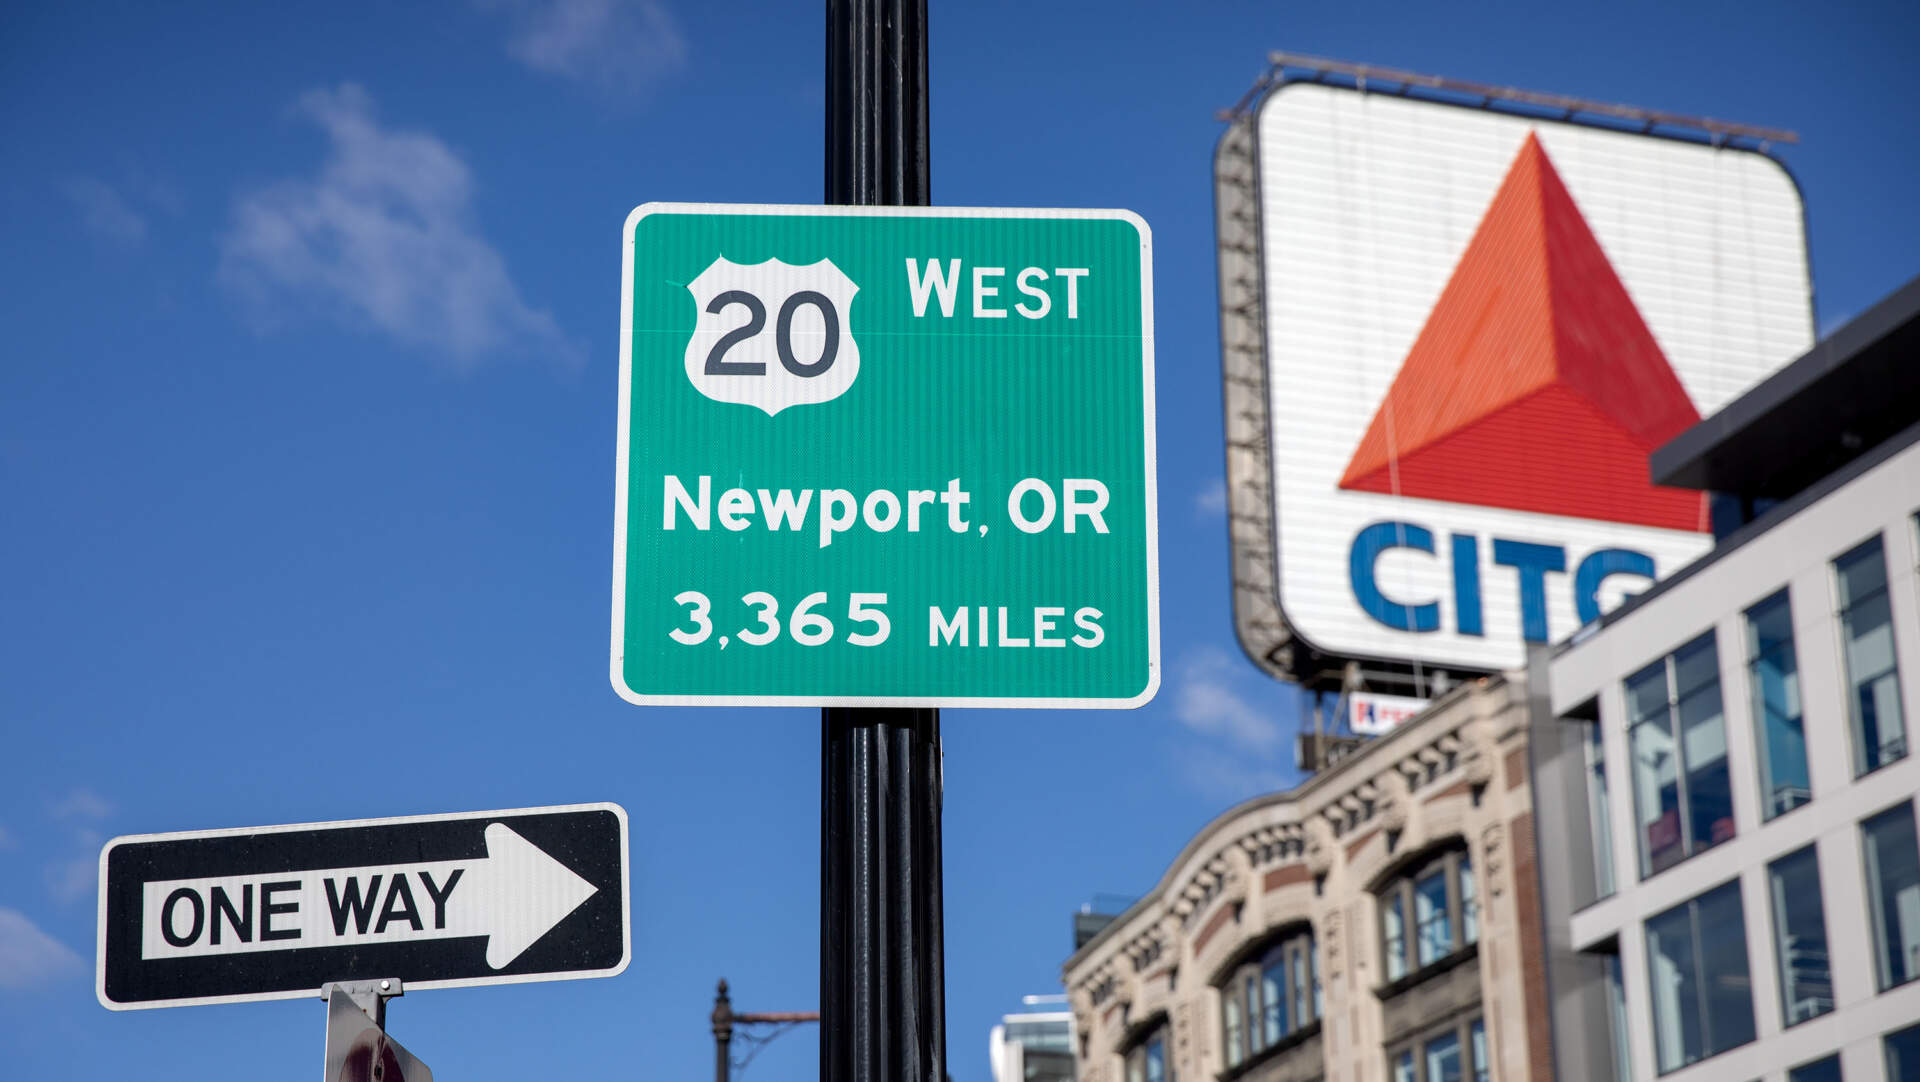 A sign in Boston's Kenmore Square tells visitors they can follow Route 20 west for 3,365 miles, all the way to Newport, Oregon. (Robin Lubbock/WBUR)